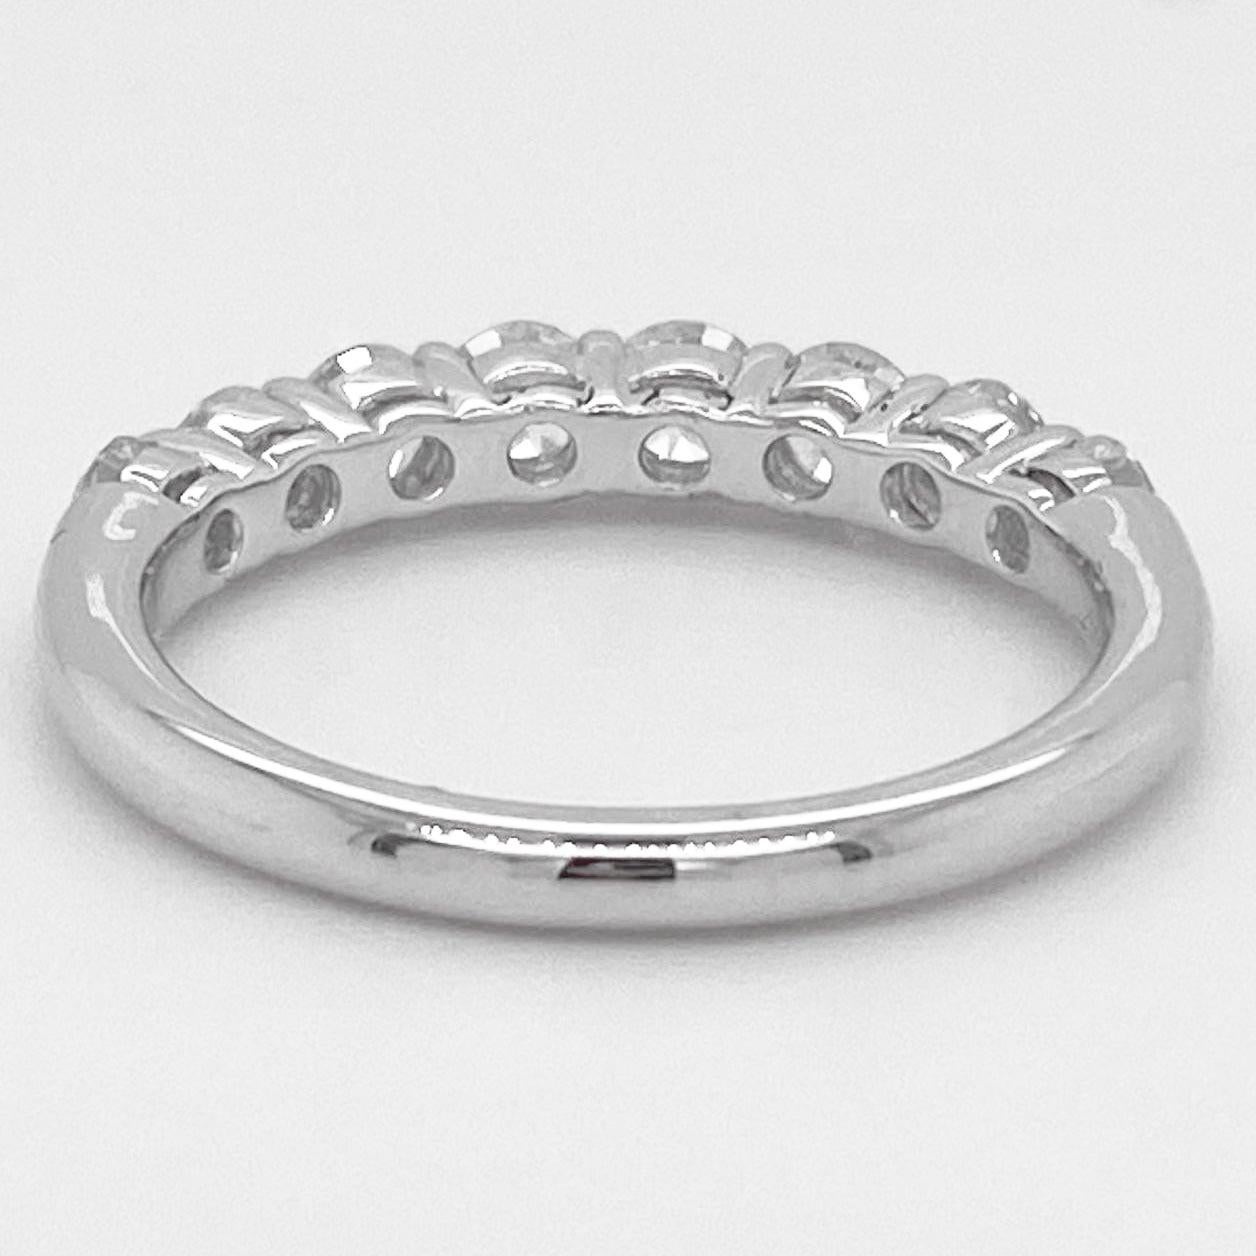 For Sale:  Diamond Band Ring, 1.11 Carat Round Diamond, Wedding Band, Stackable 4